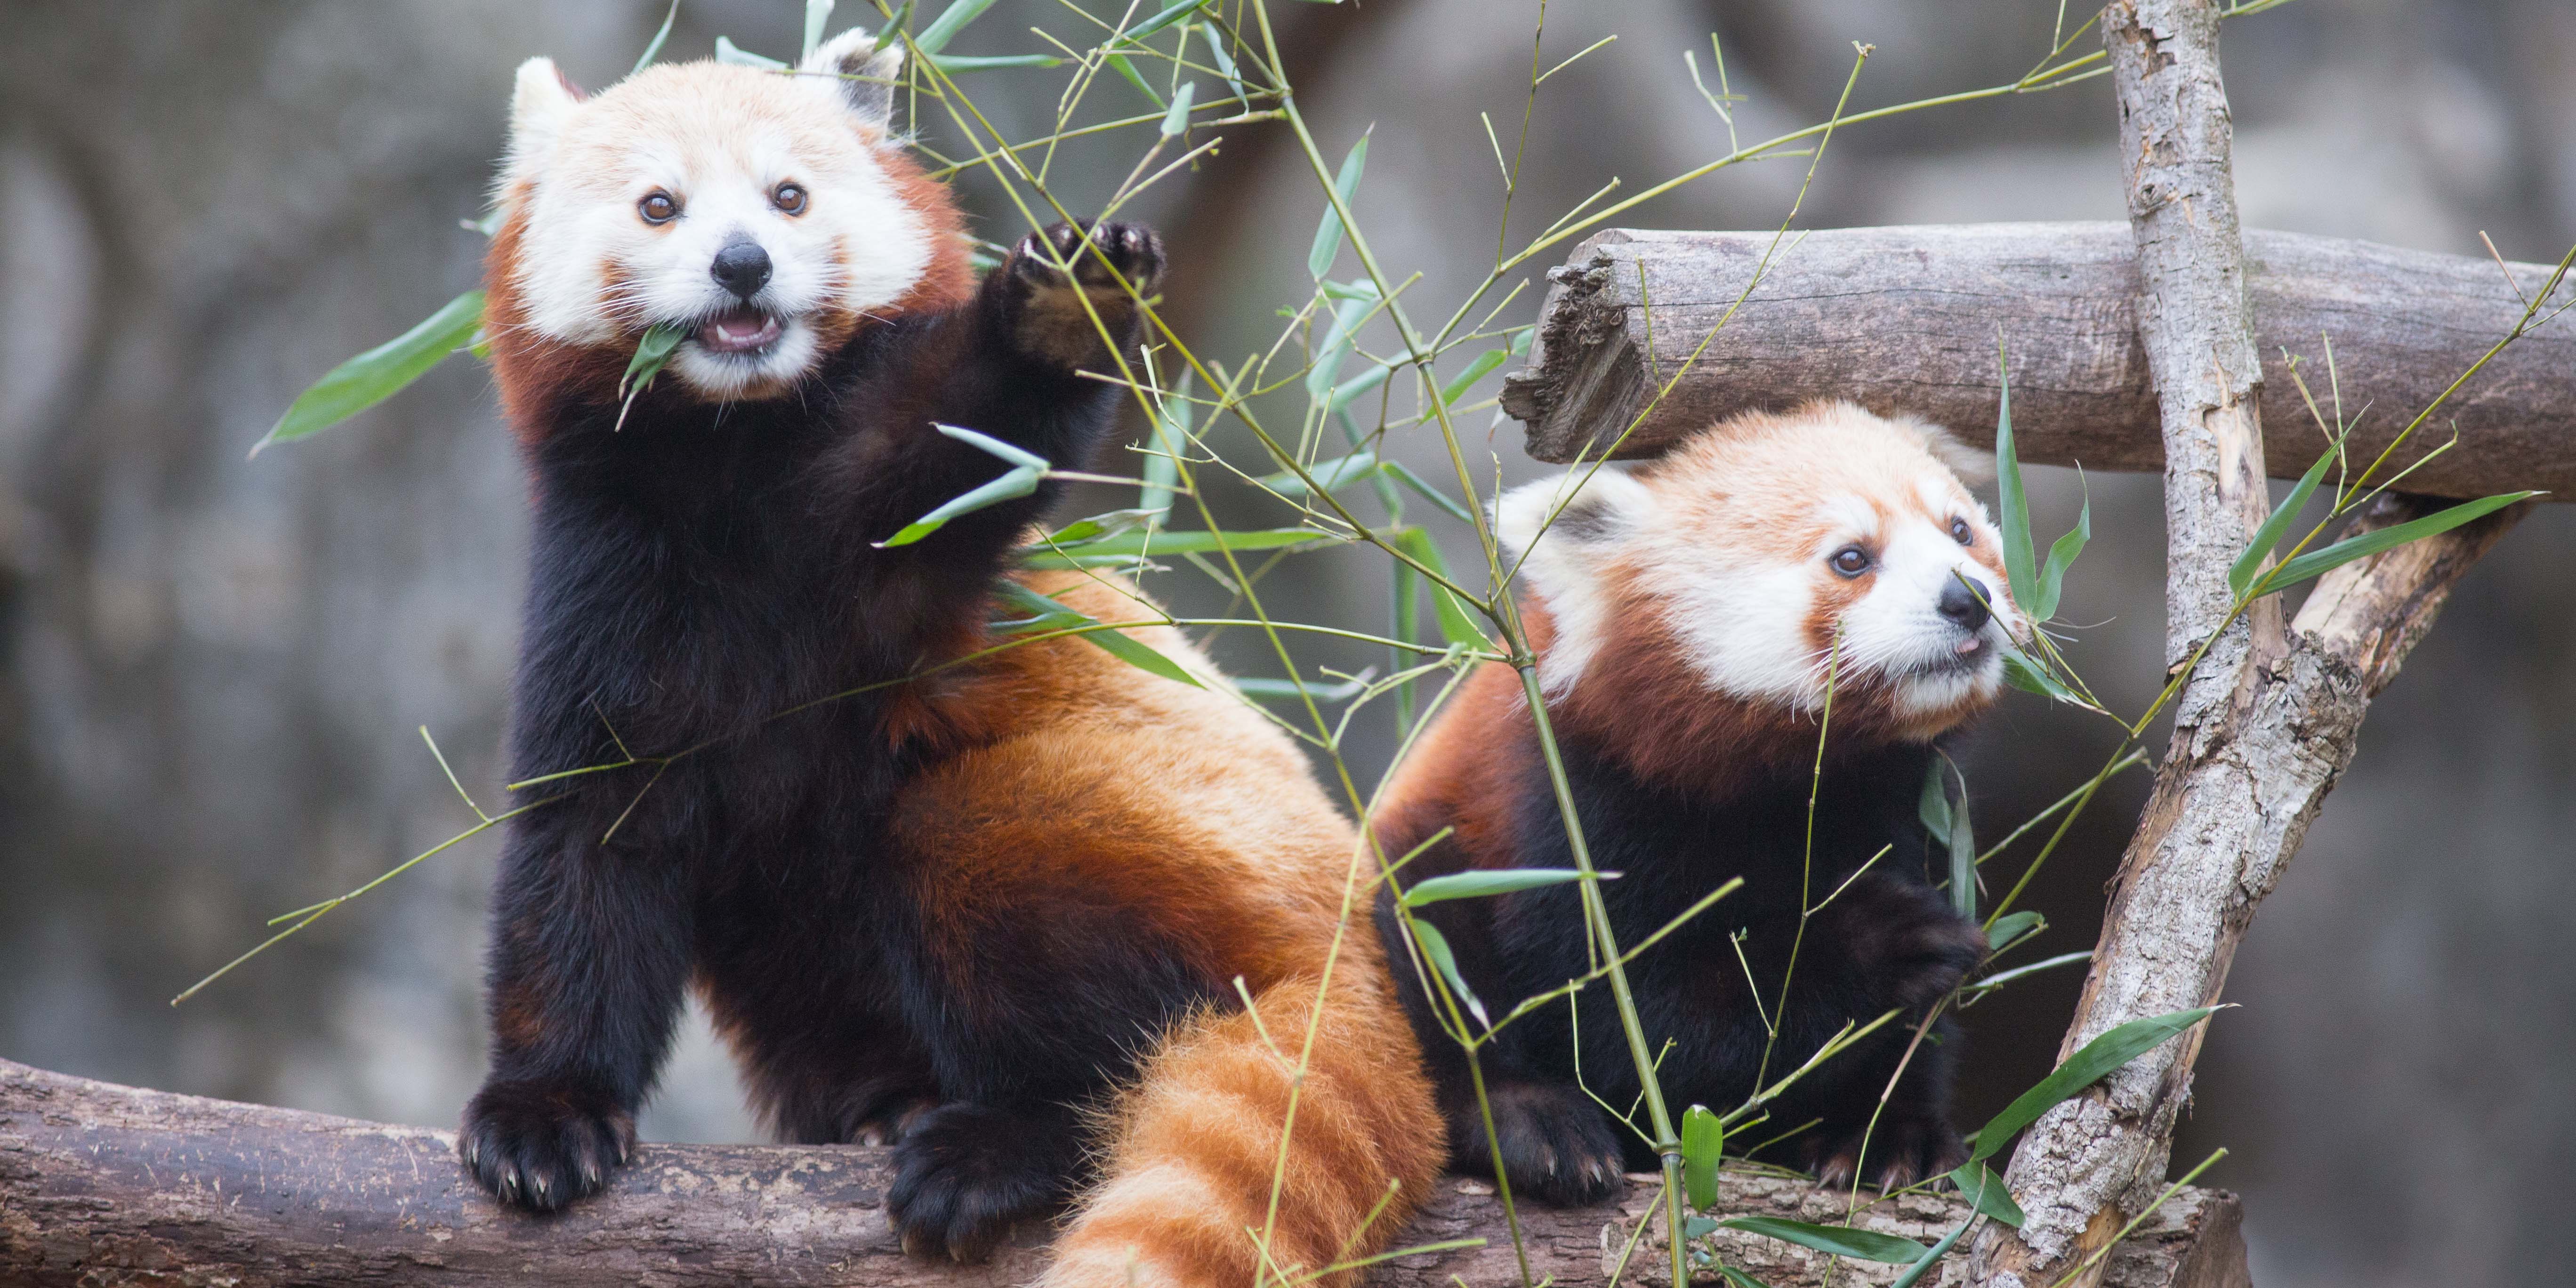 prøve Hospital har en finger i kagen Is a Red Panda a Bear? And More Red Panda Facts | Smithsonian's National Zoo